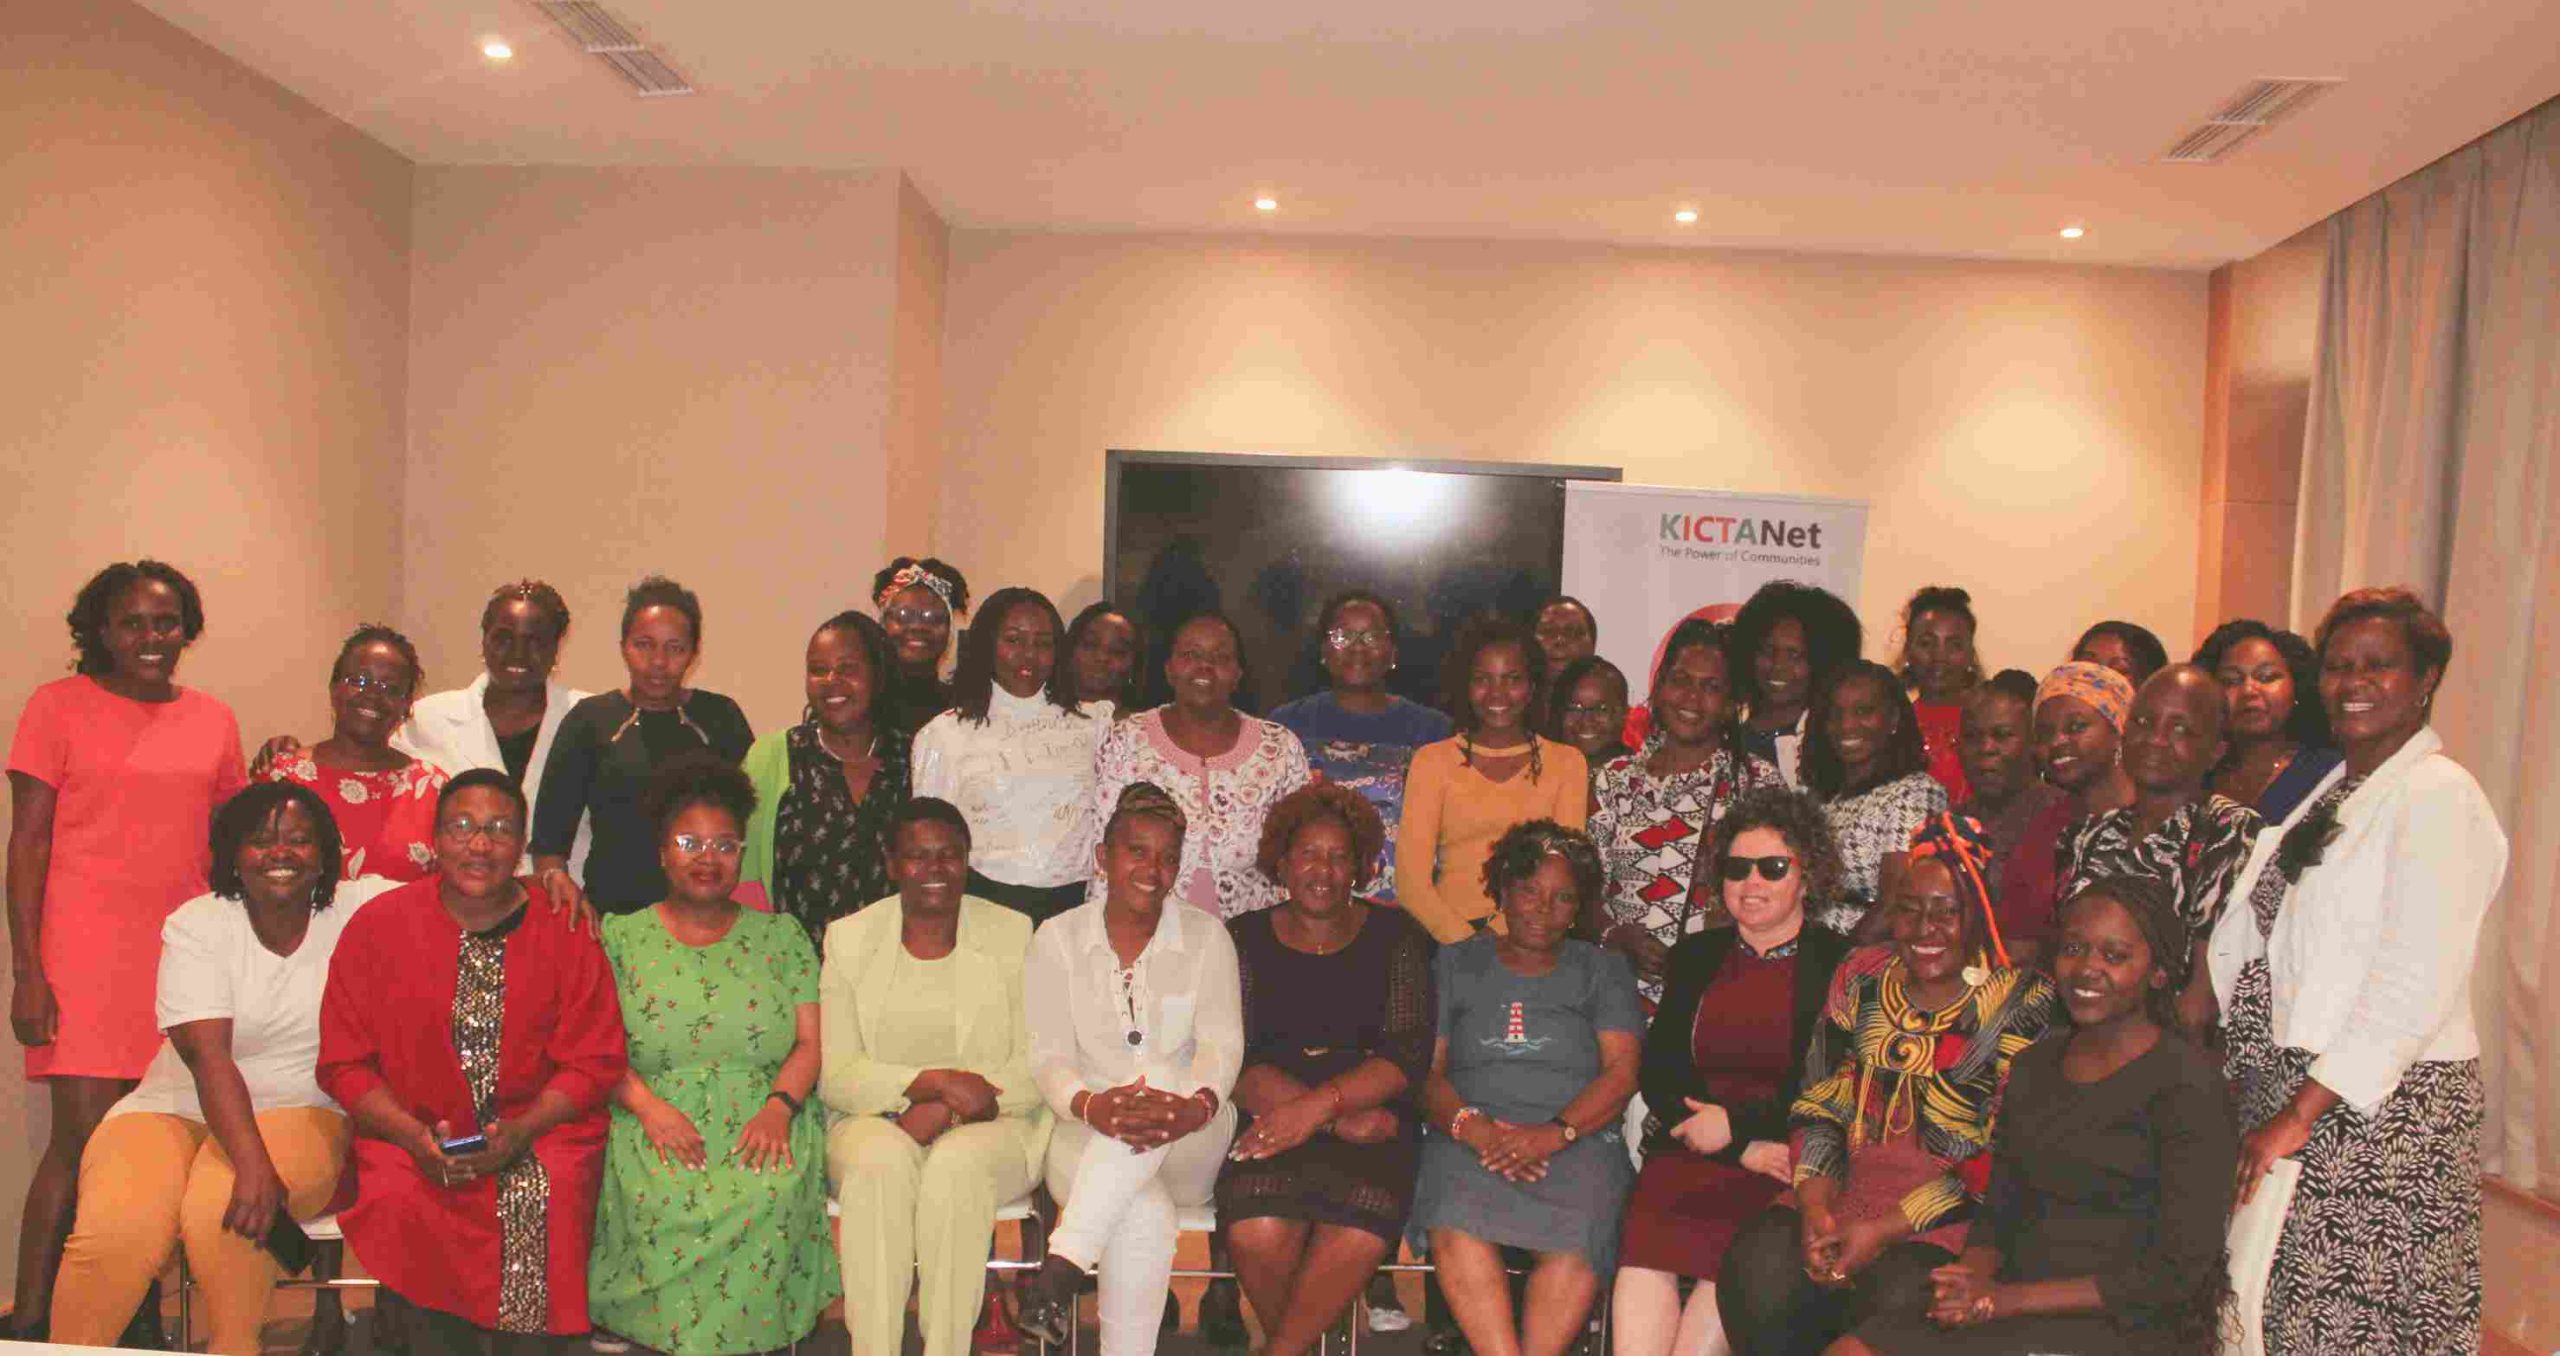 KICTANet Conducts Digital Security Training for Women in Politics